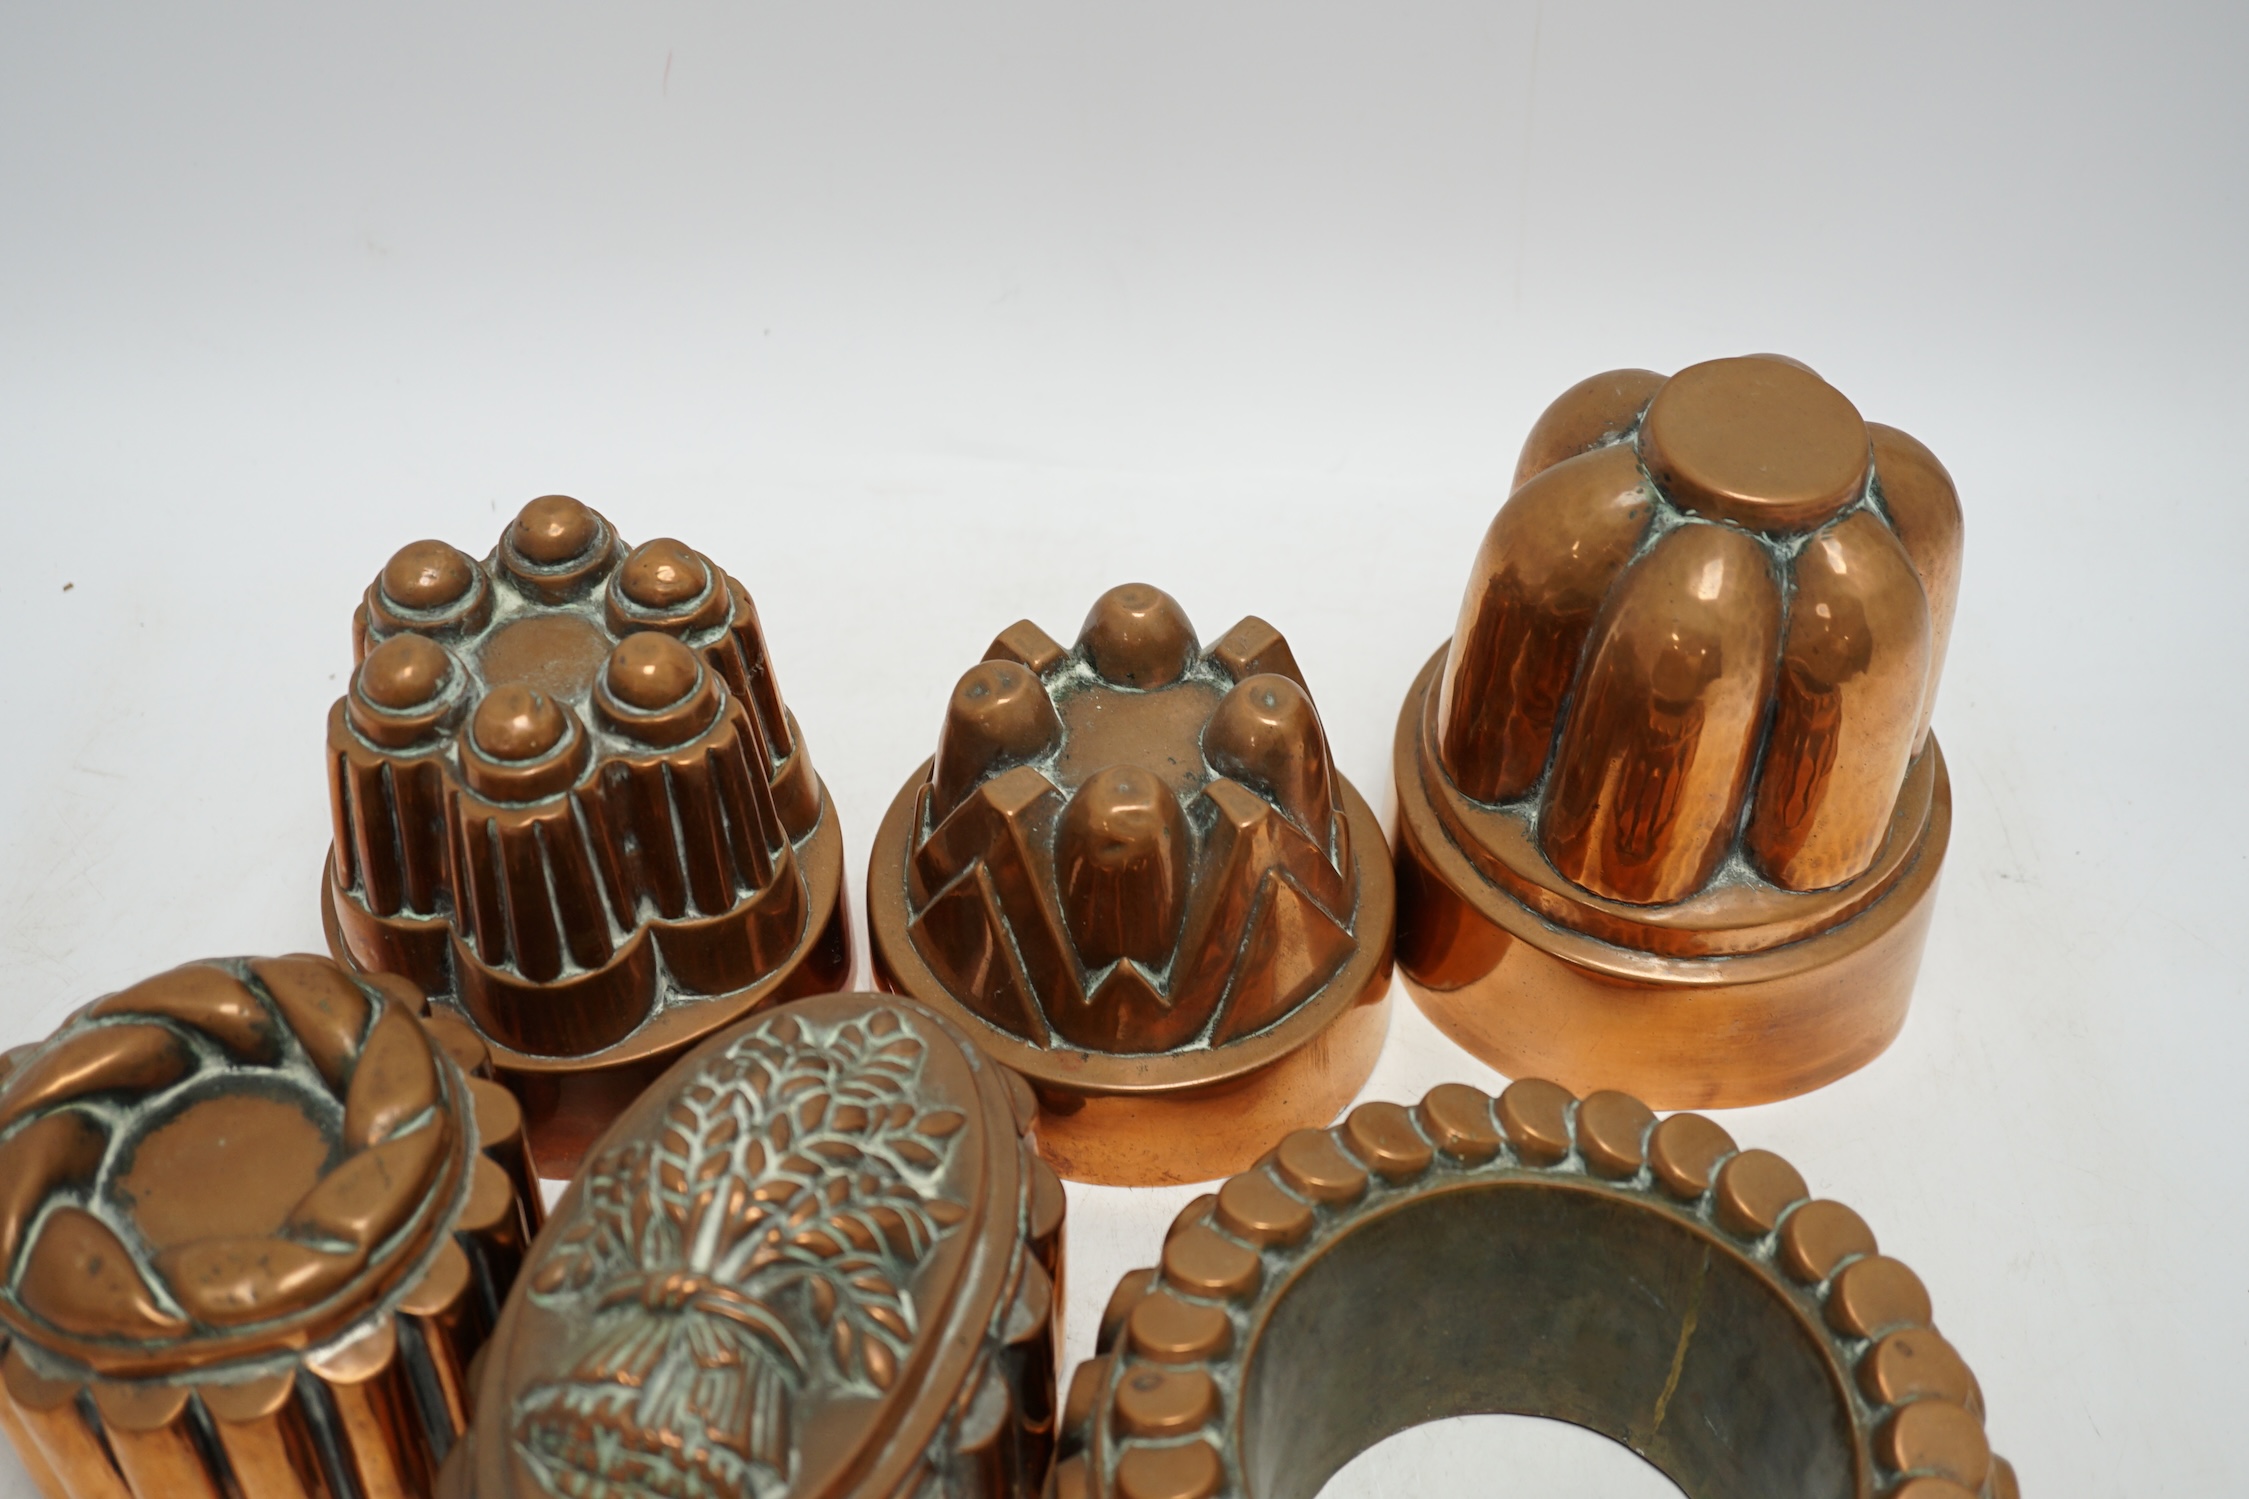 Six Victorian copper jelly moulds, tallest 14.5cm high. Condition - good